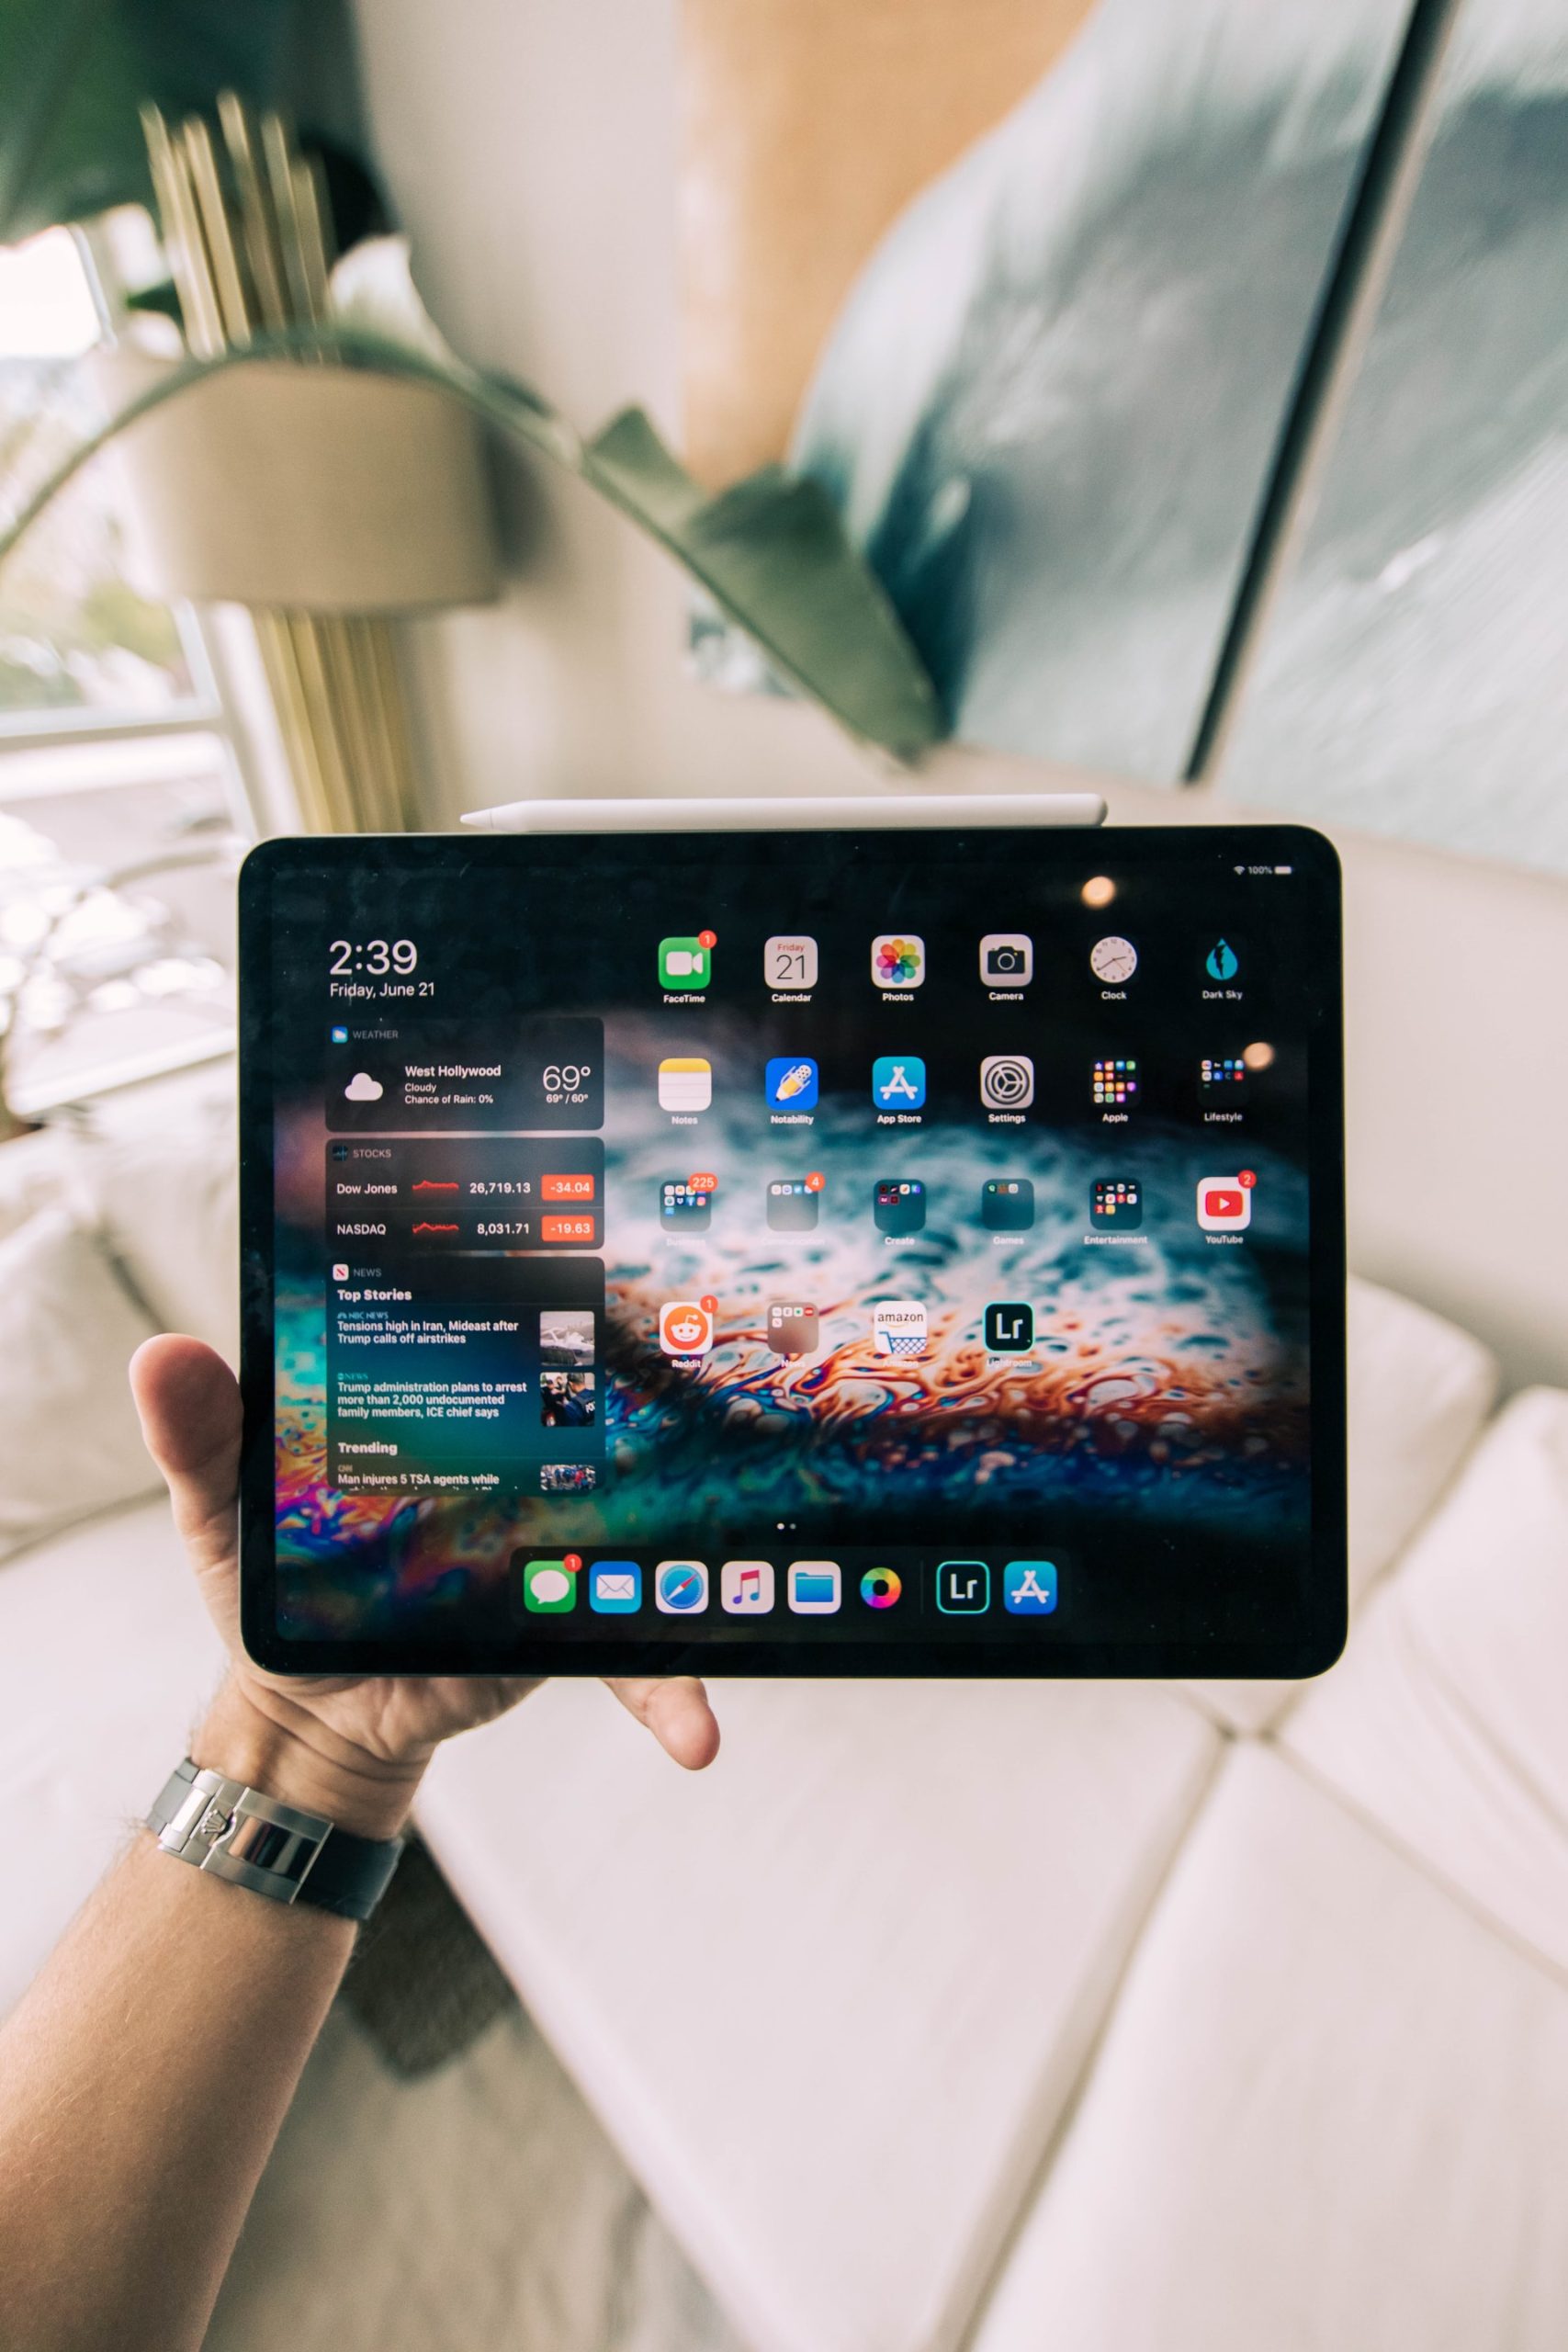 What Is The Newest IPad Out Right Now?